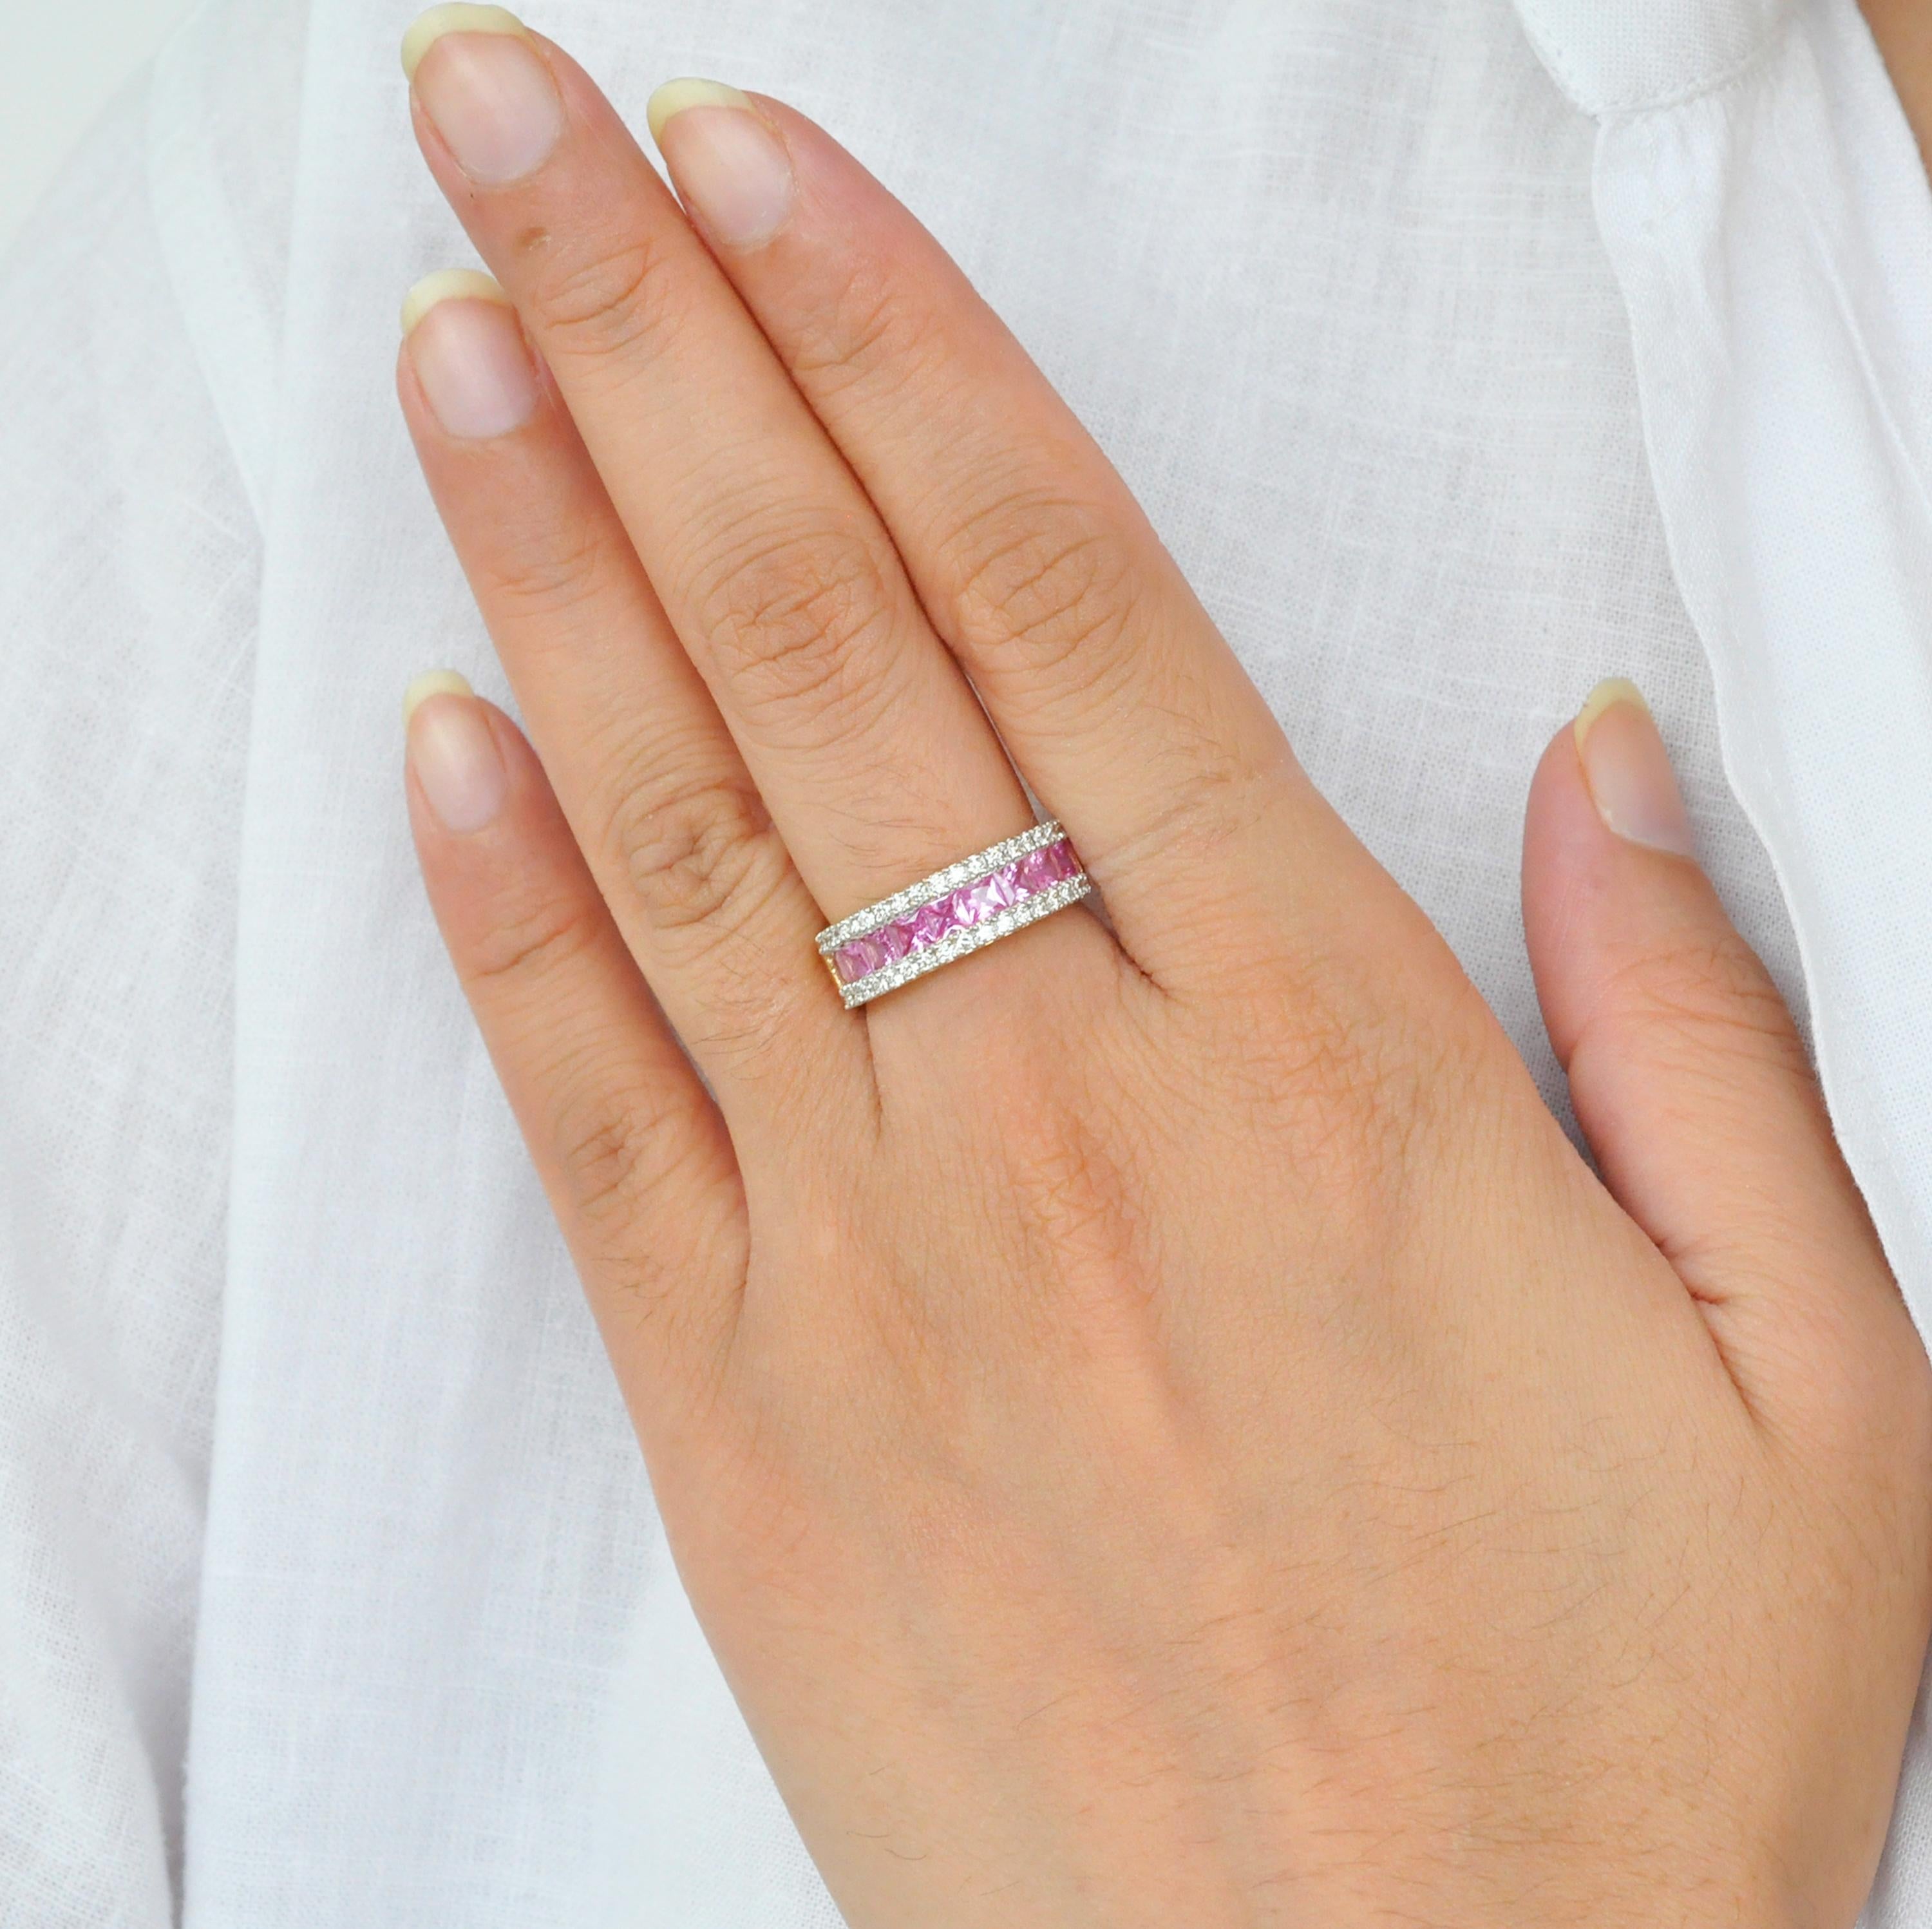 18 karat gold channel set princess cut pink sapphire diamond linear band ring.

This beautiful linear band ring with lustrous pink sapphires are extremely spectacular. Elegance and chic in one, this ring features high quality clean and clear